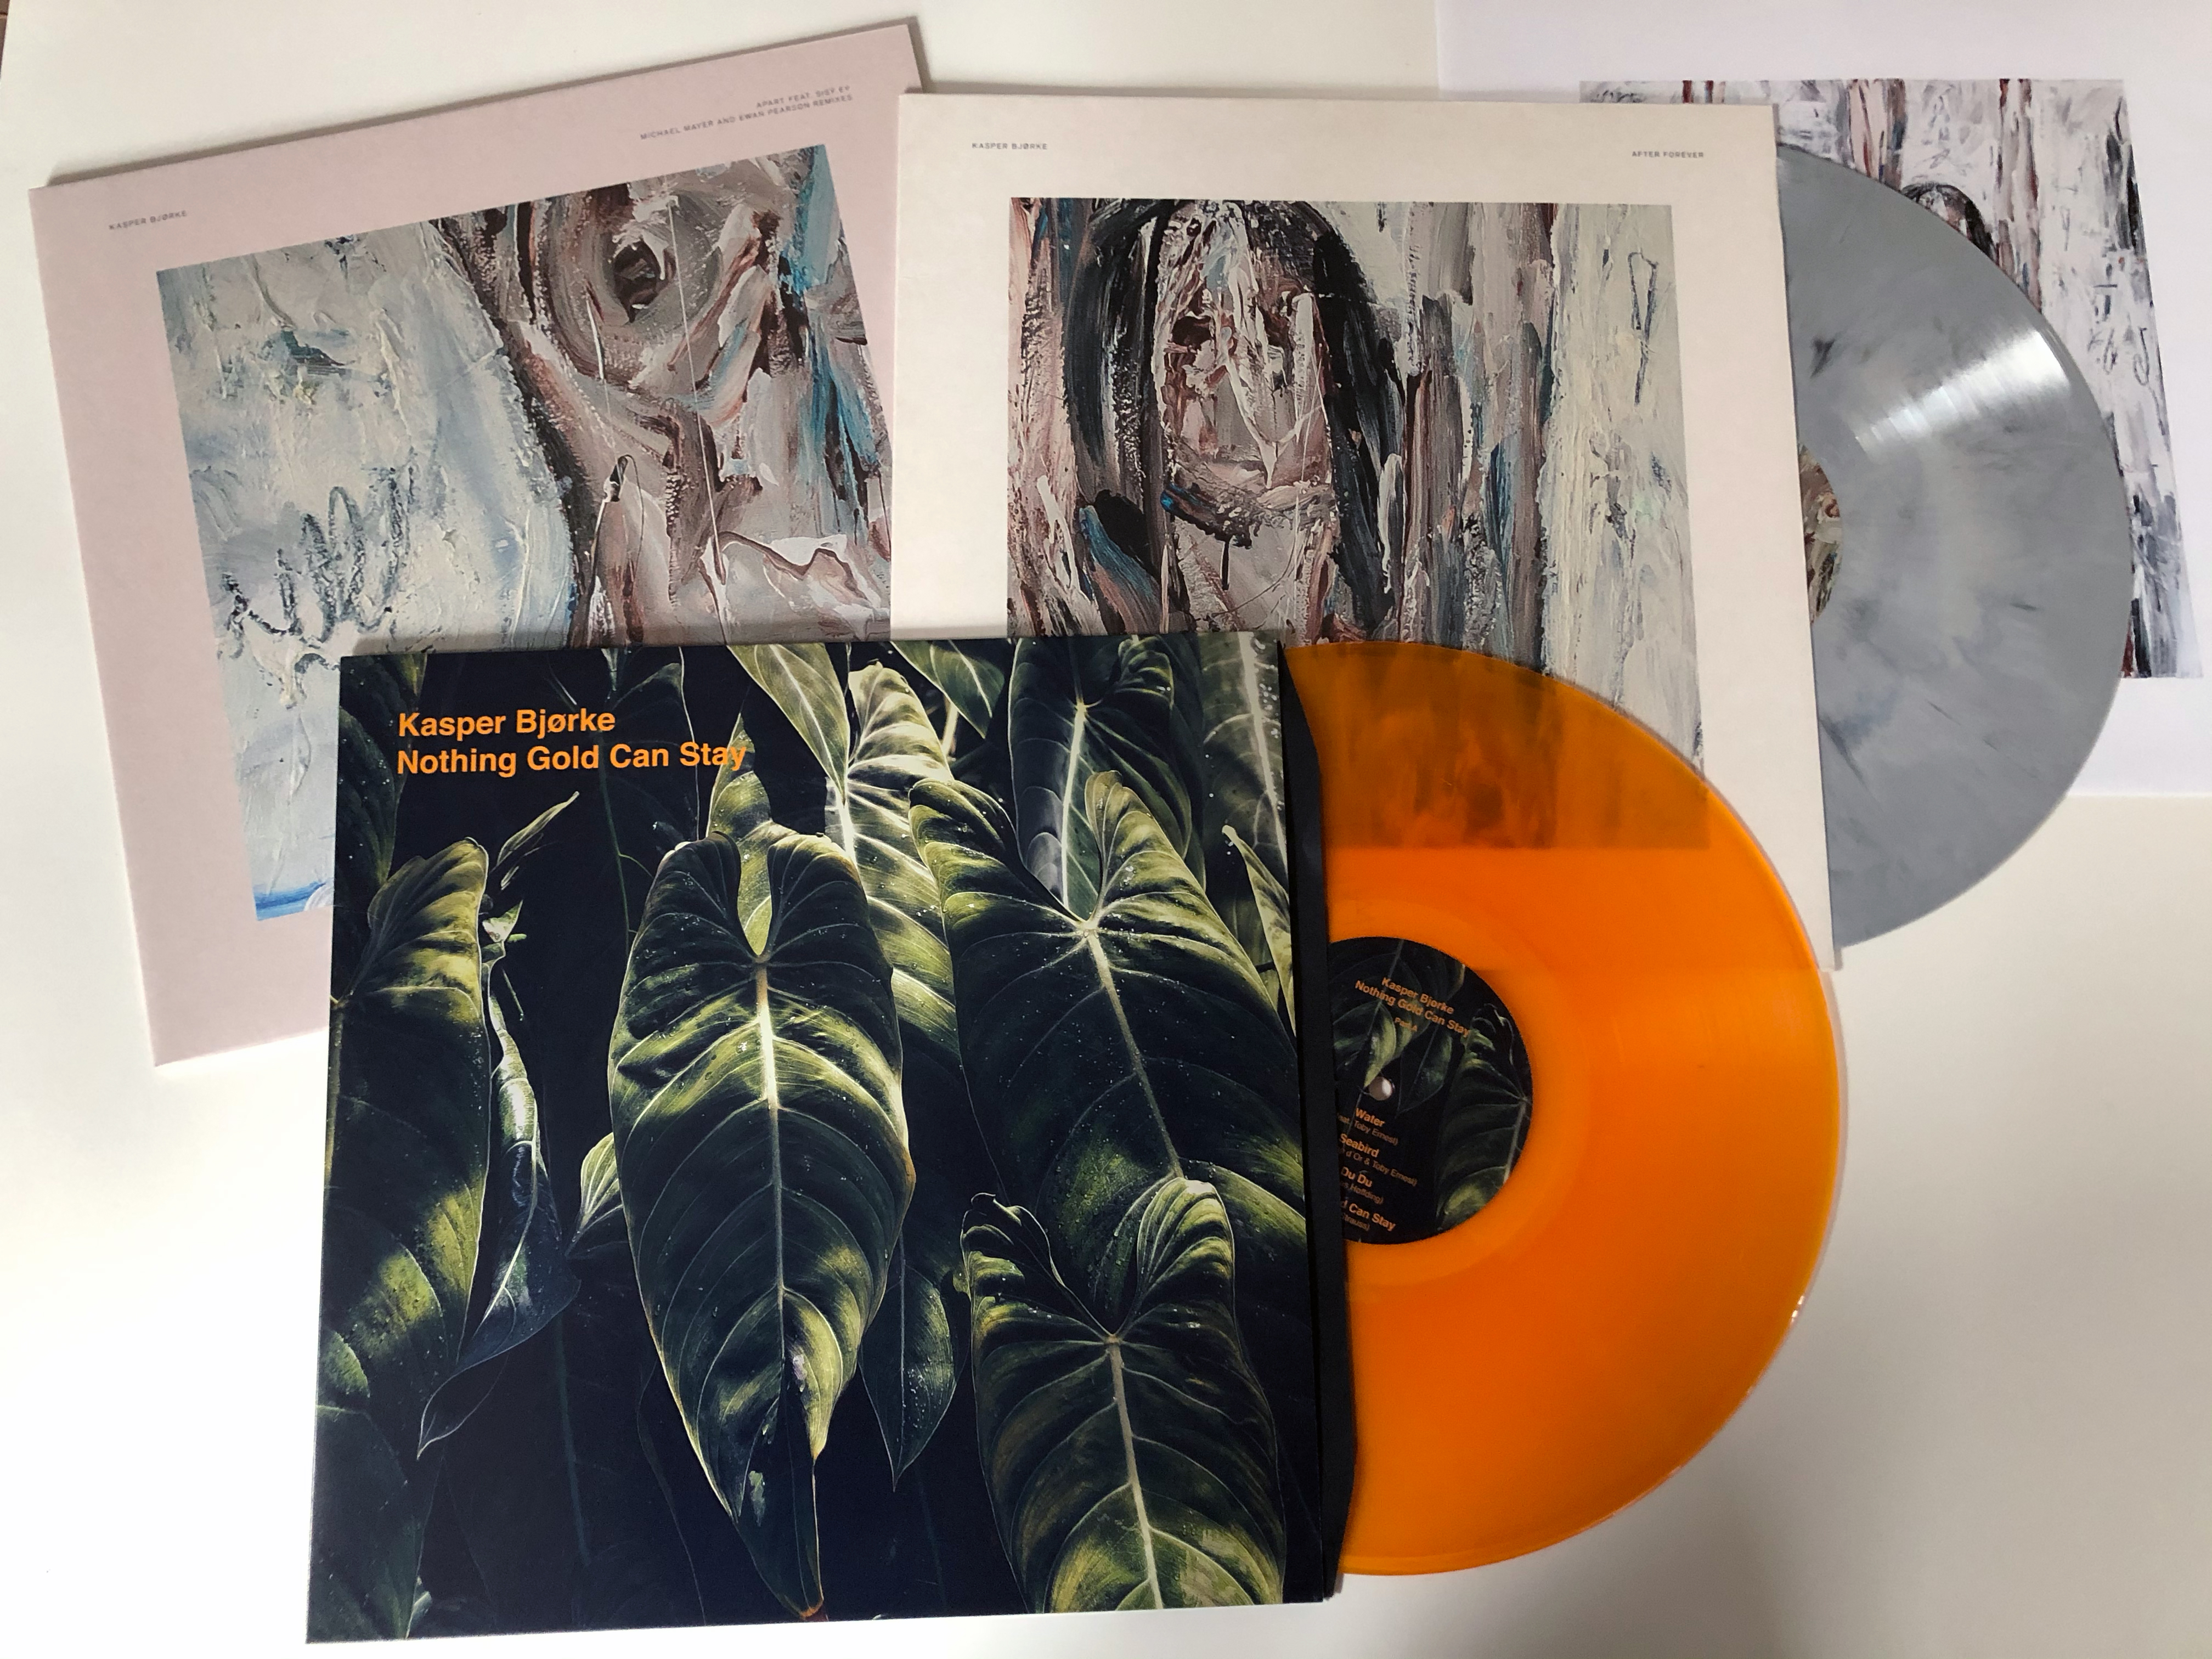 "After Forever" (coloured vinyl), the 12" vinyl EP "Apart (feat. Sisy Ey) Michael Mayer and Ewan Pearson Remixes, the 12" vinyl EP / mini album "Nothing Gold Can Stay" (coloured vinyl), and the digital album "After Forever Revisited".